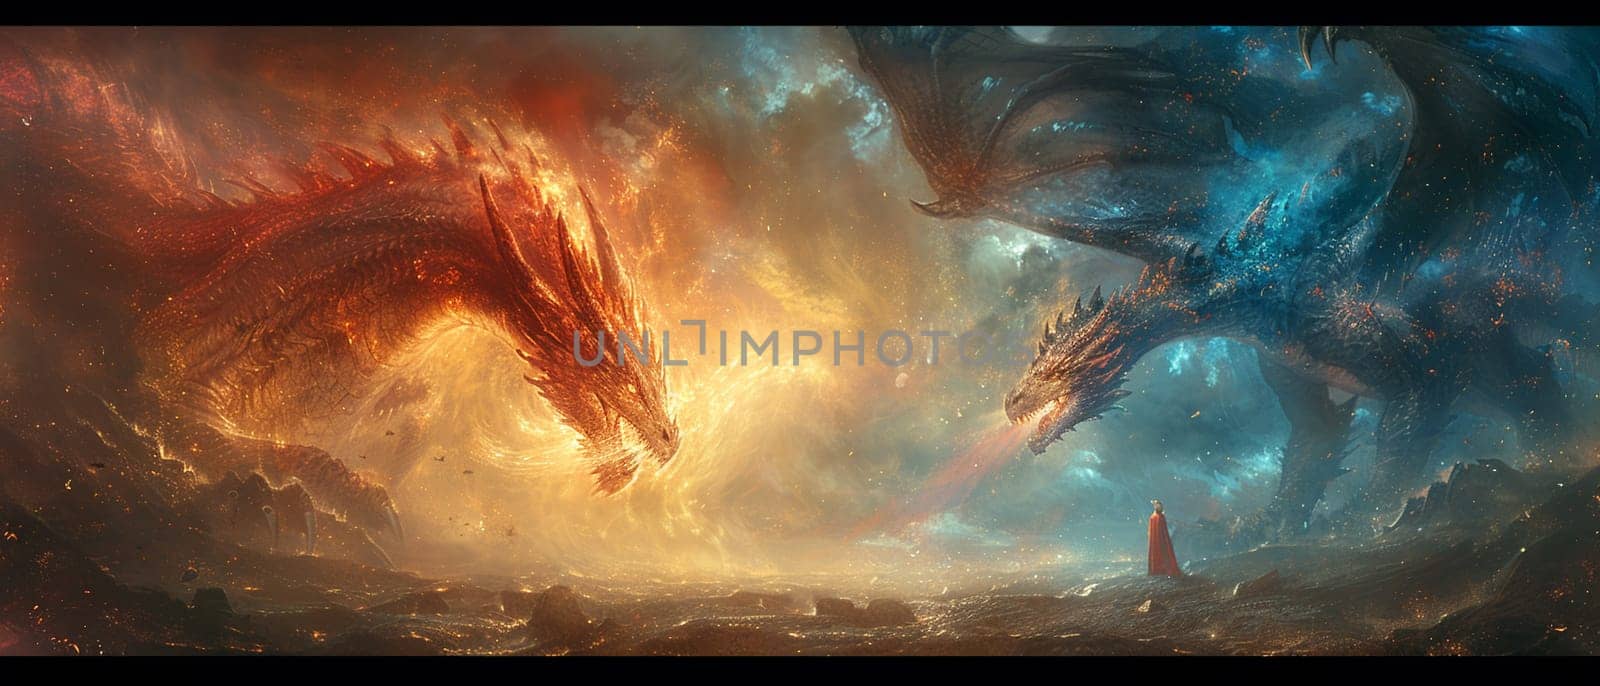 Dragon and knight facing off in a dramatic showdown, illustrated with intense colors and action.